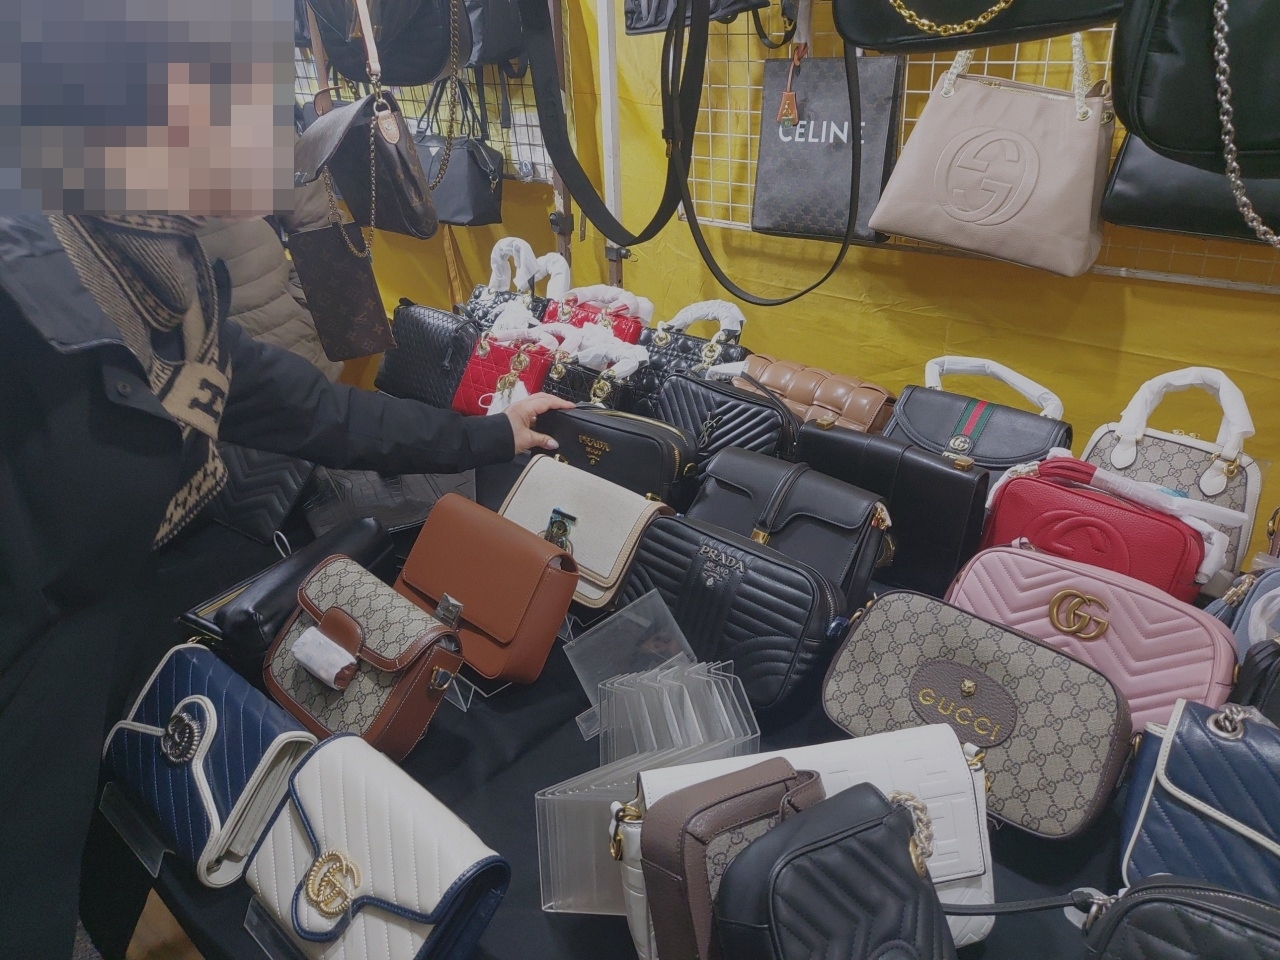 South Korea's counterfeit market is very much alive